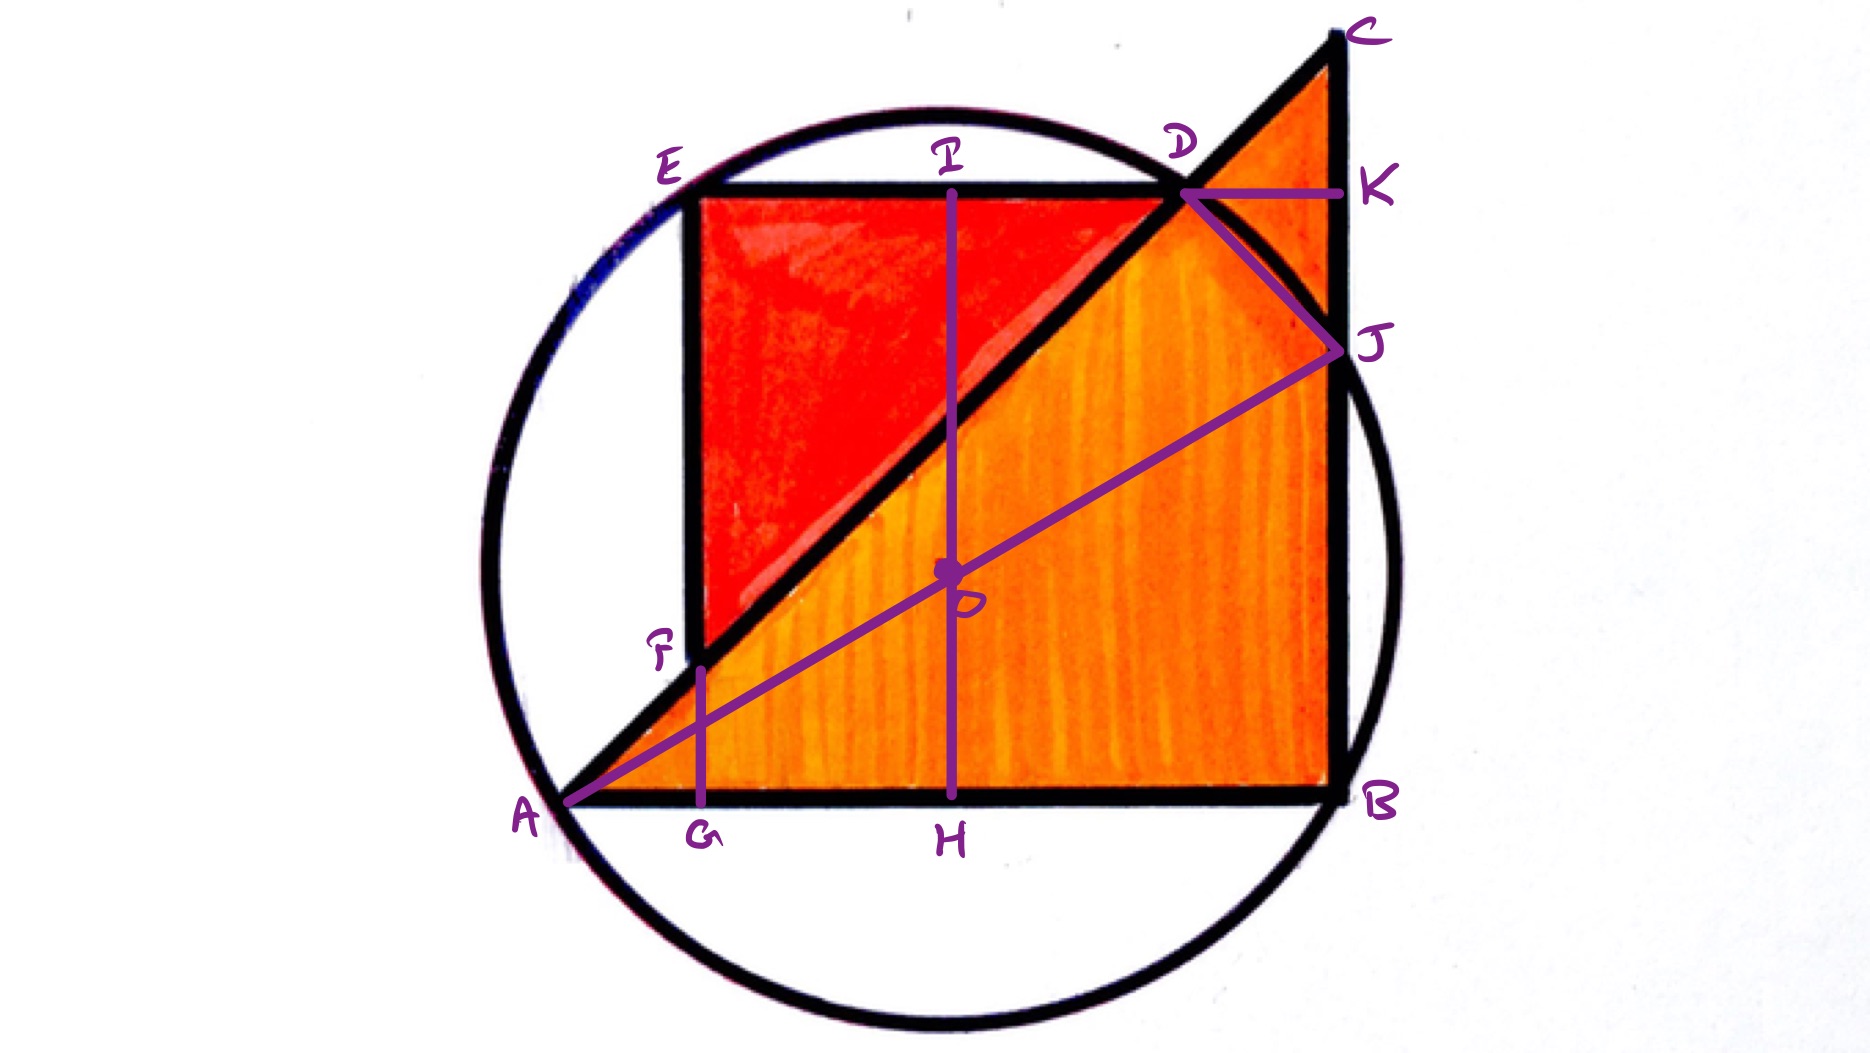 Two half squares and a circle labelled